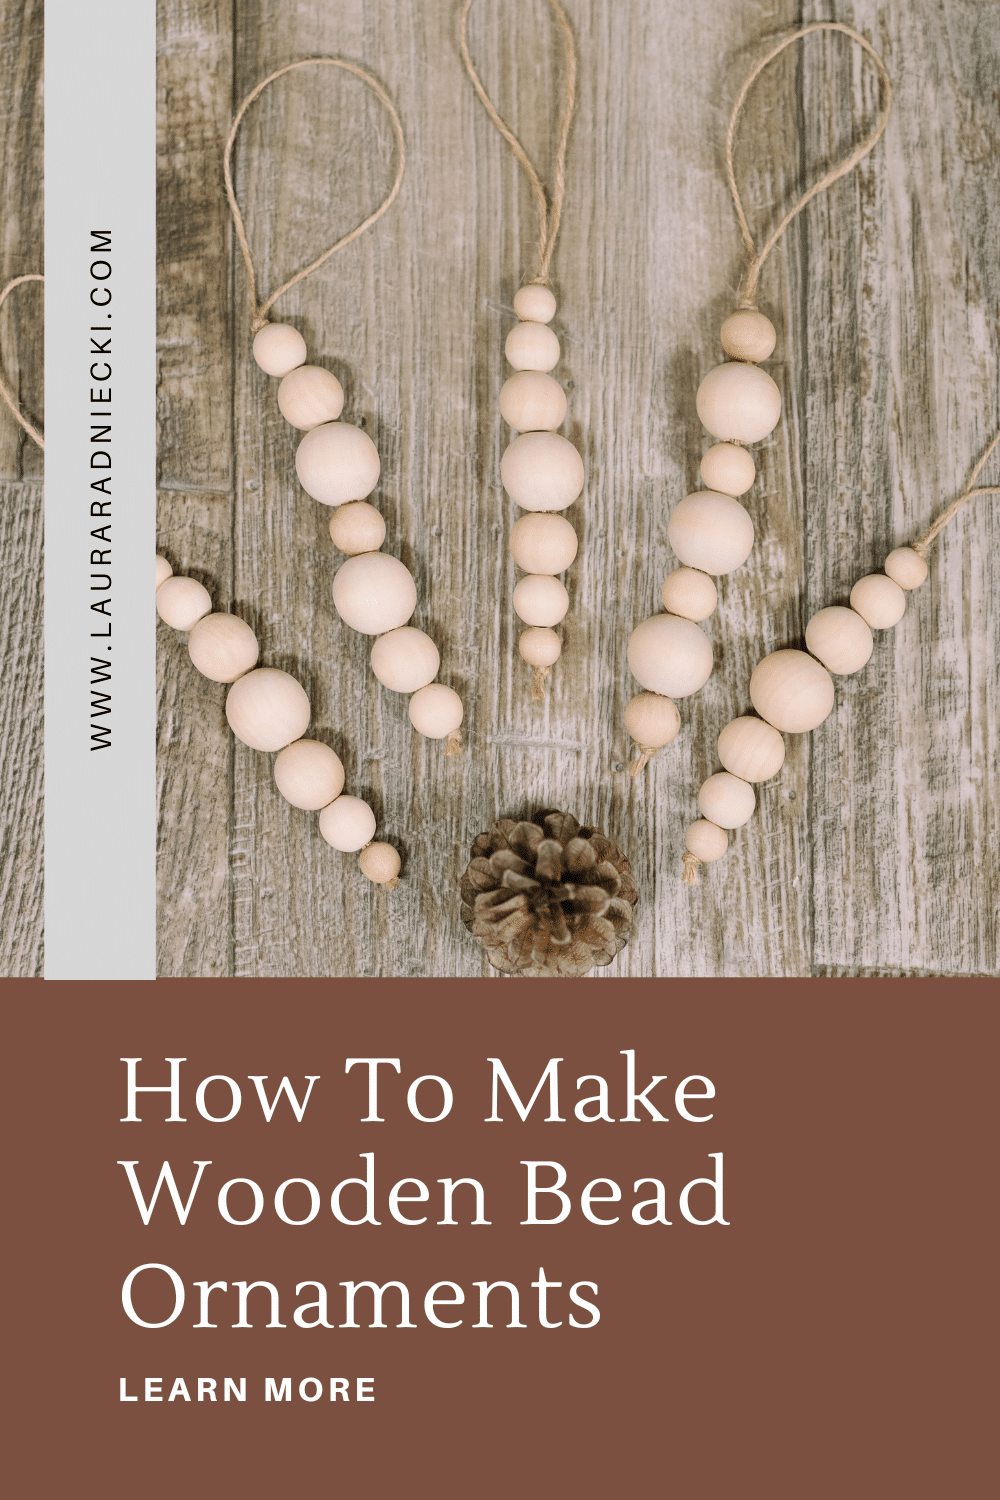 How to Make Wooden Bead Ornaments for Christmas Tree